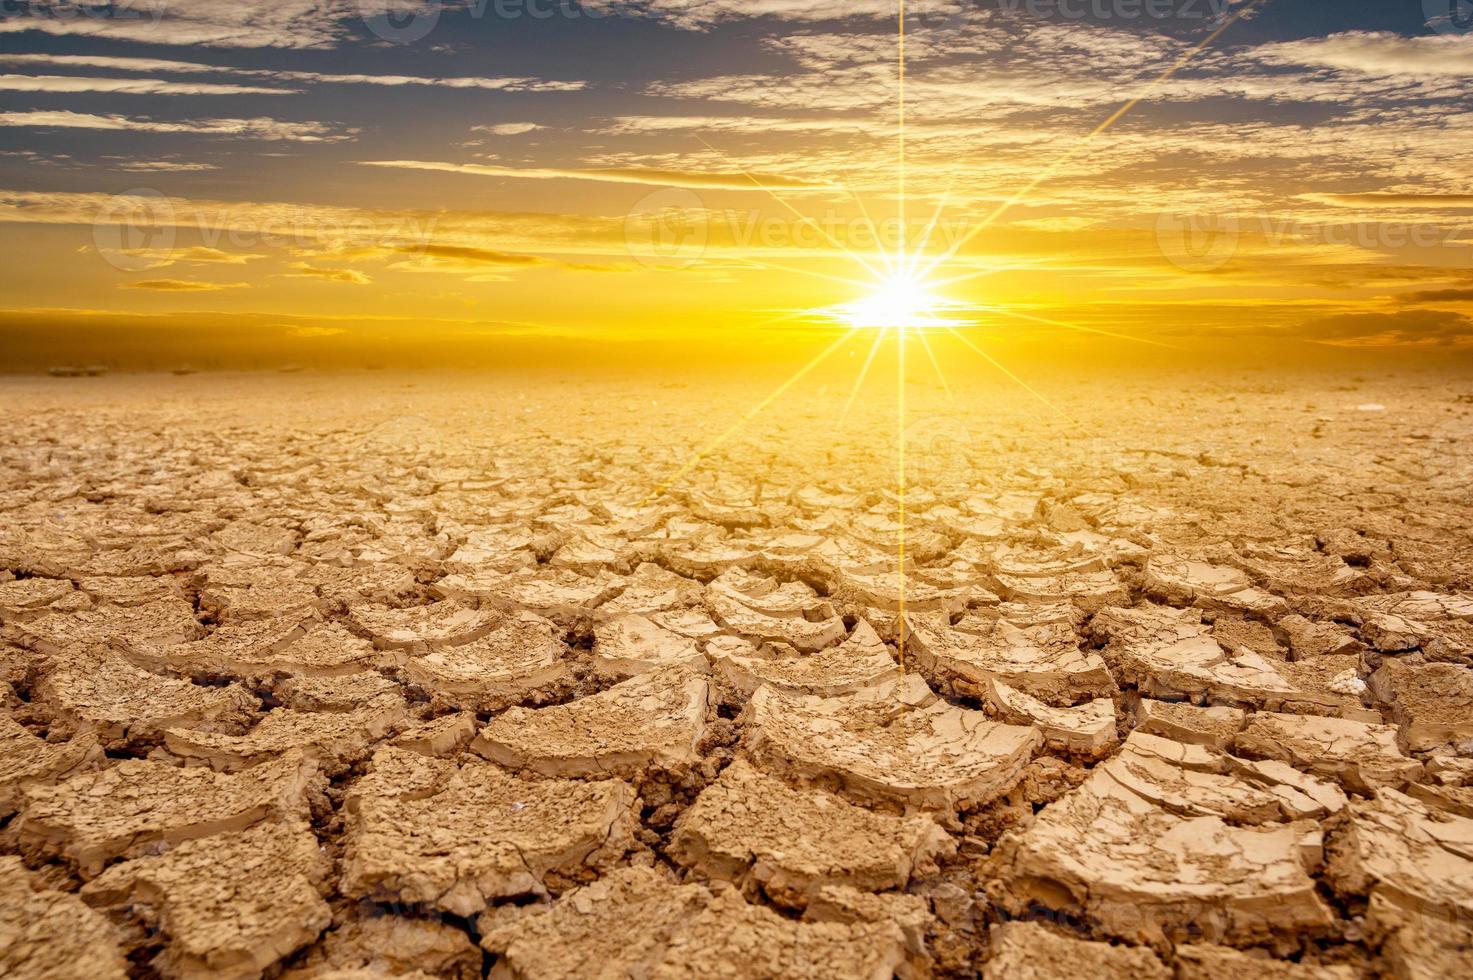 arid Clay soil Sun desert global worming concept cracked scorched earth soil drought desert landscape dramatic sunset photo